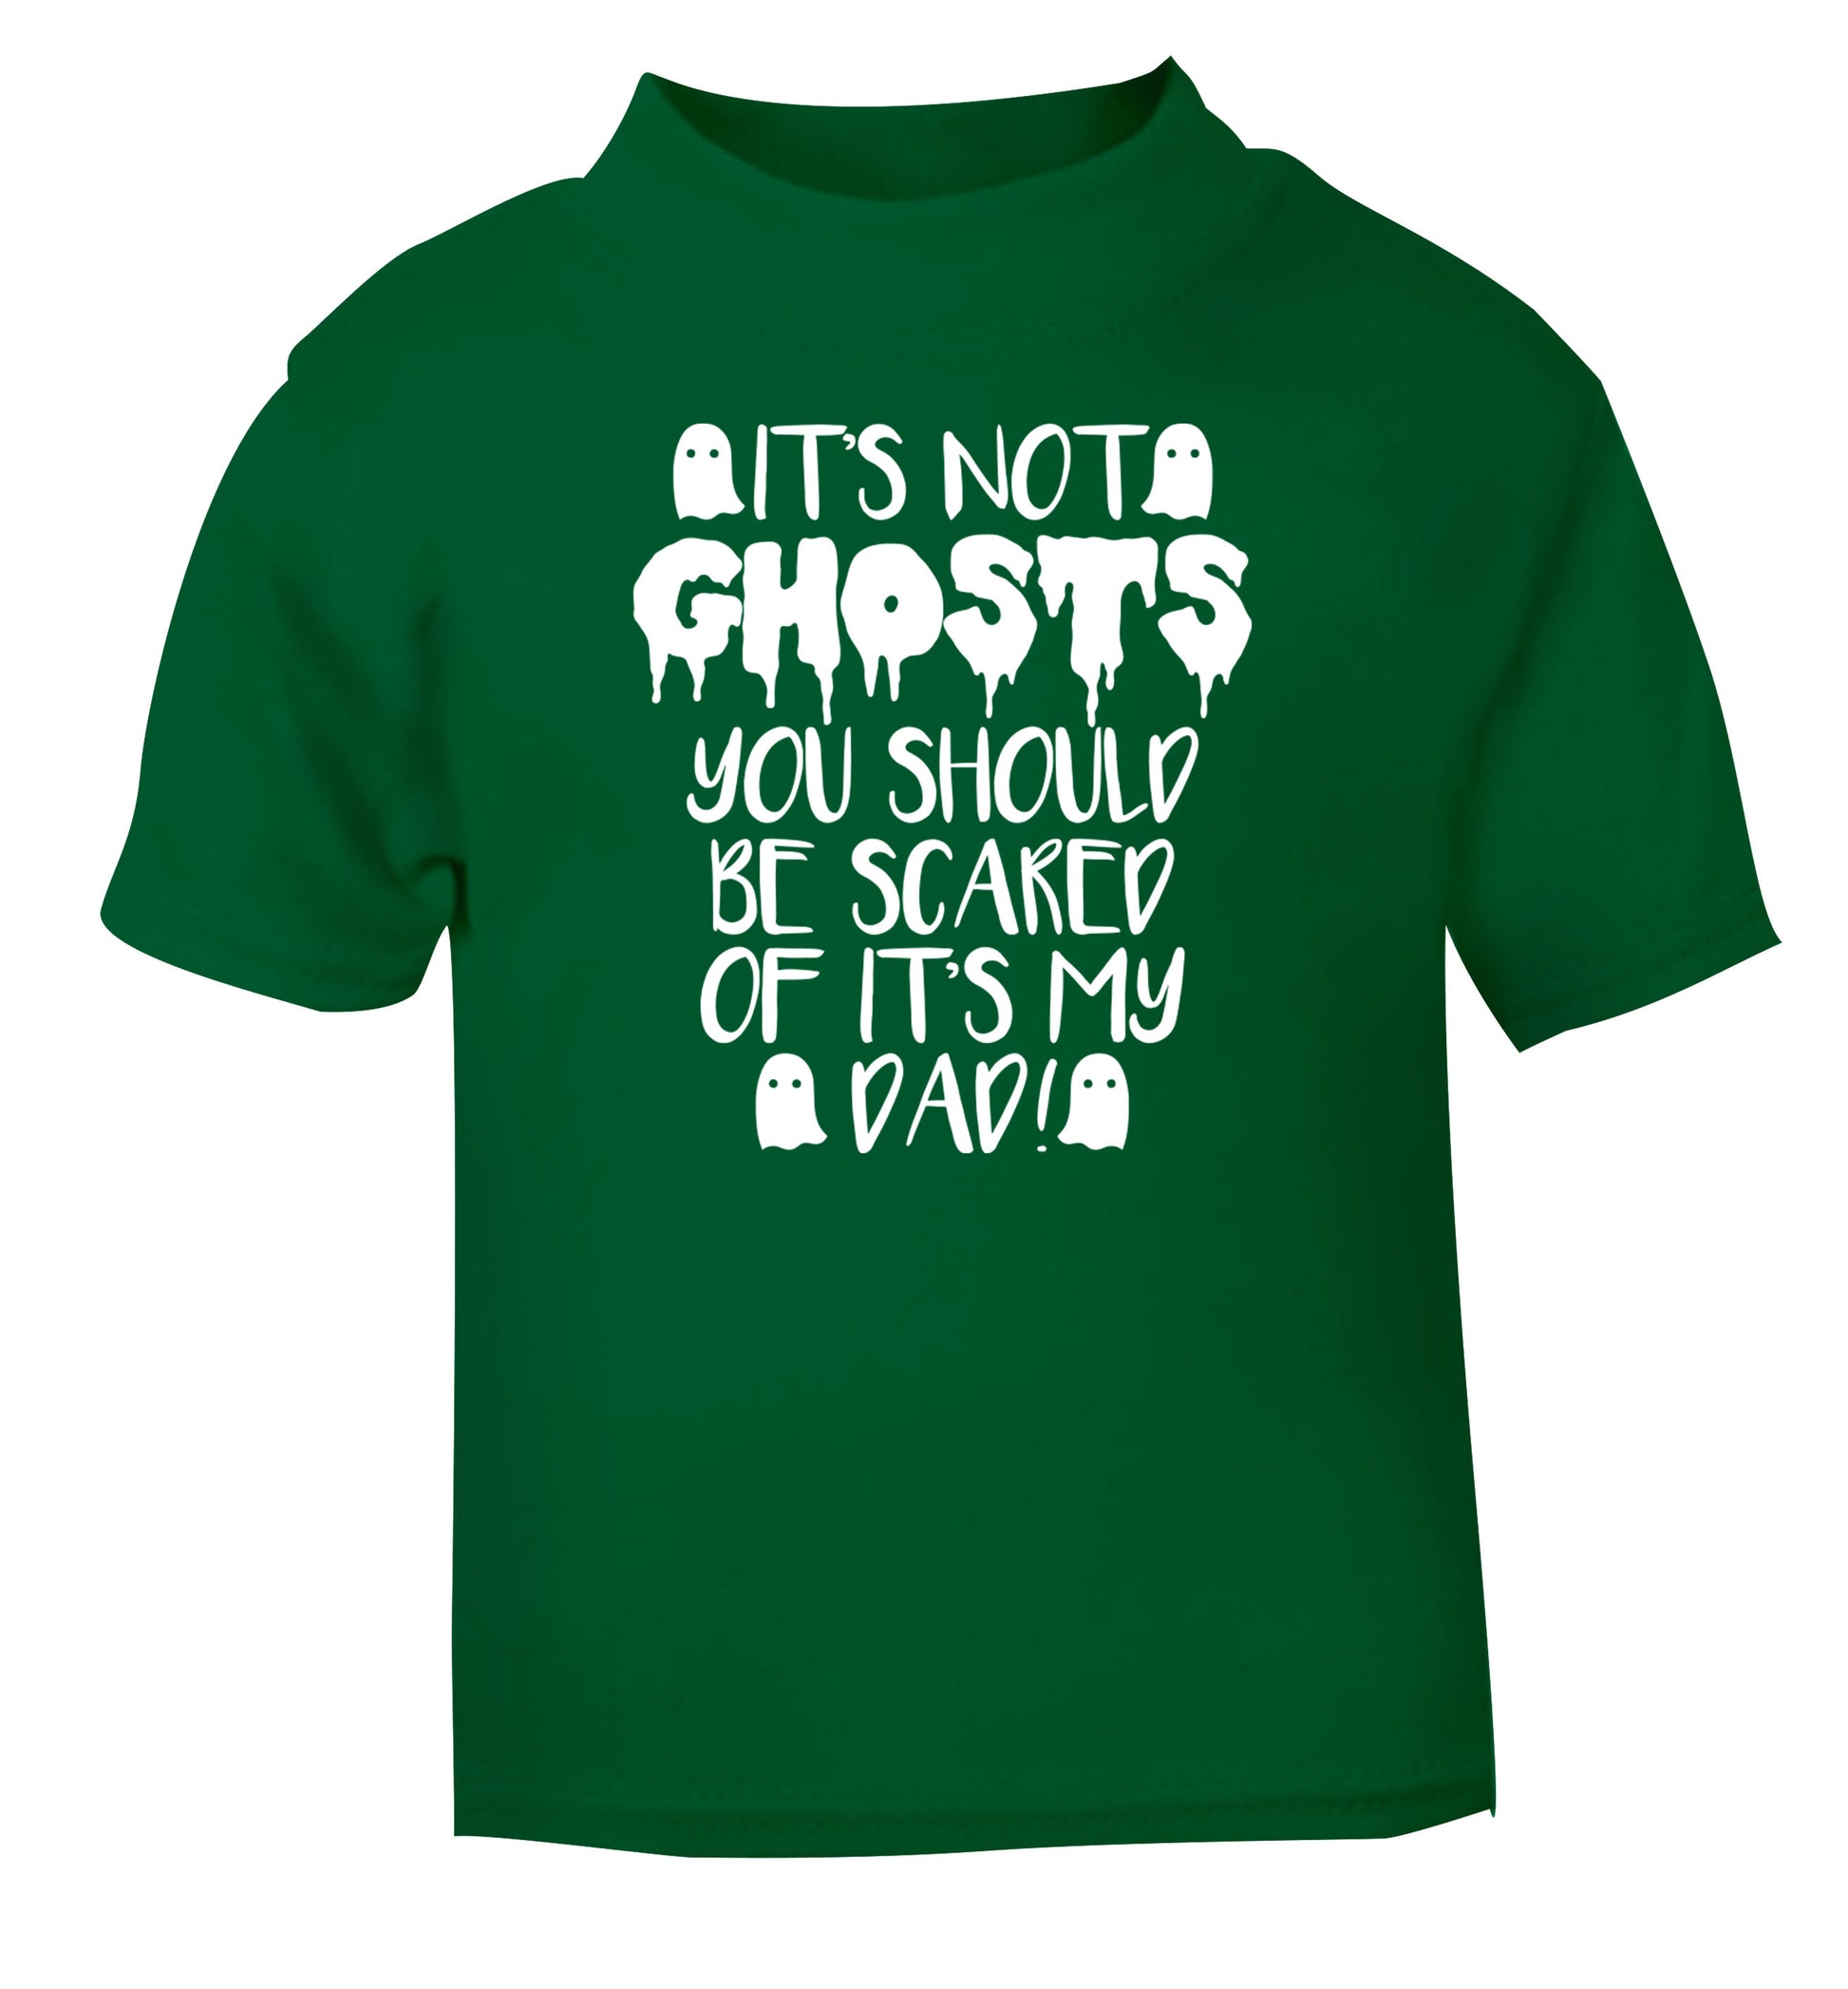 It's not ghosts you should be scared of it's my dad! green Baby Toddler Tshirt 2 Years